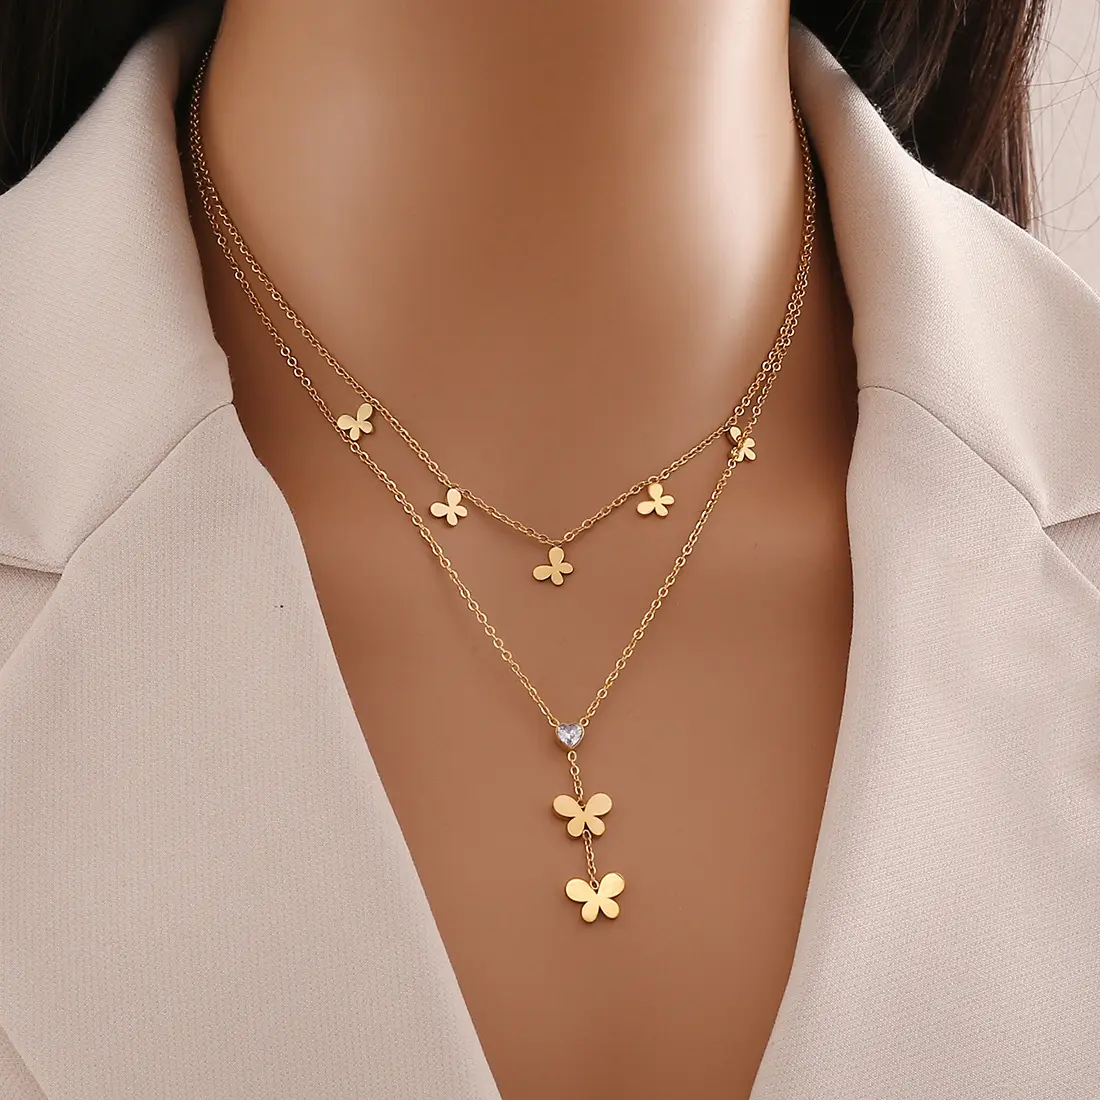 Personalized Fashion Alloy Gold Plated Butterfly Pendant Necklace Jewelry Accessories Women Double-layer Clavicle Chain Necklace